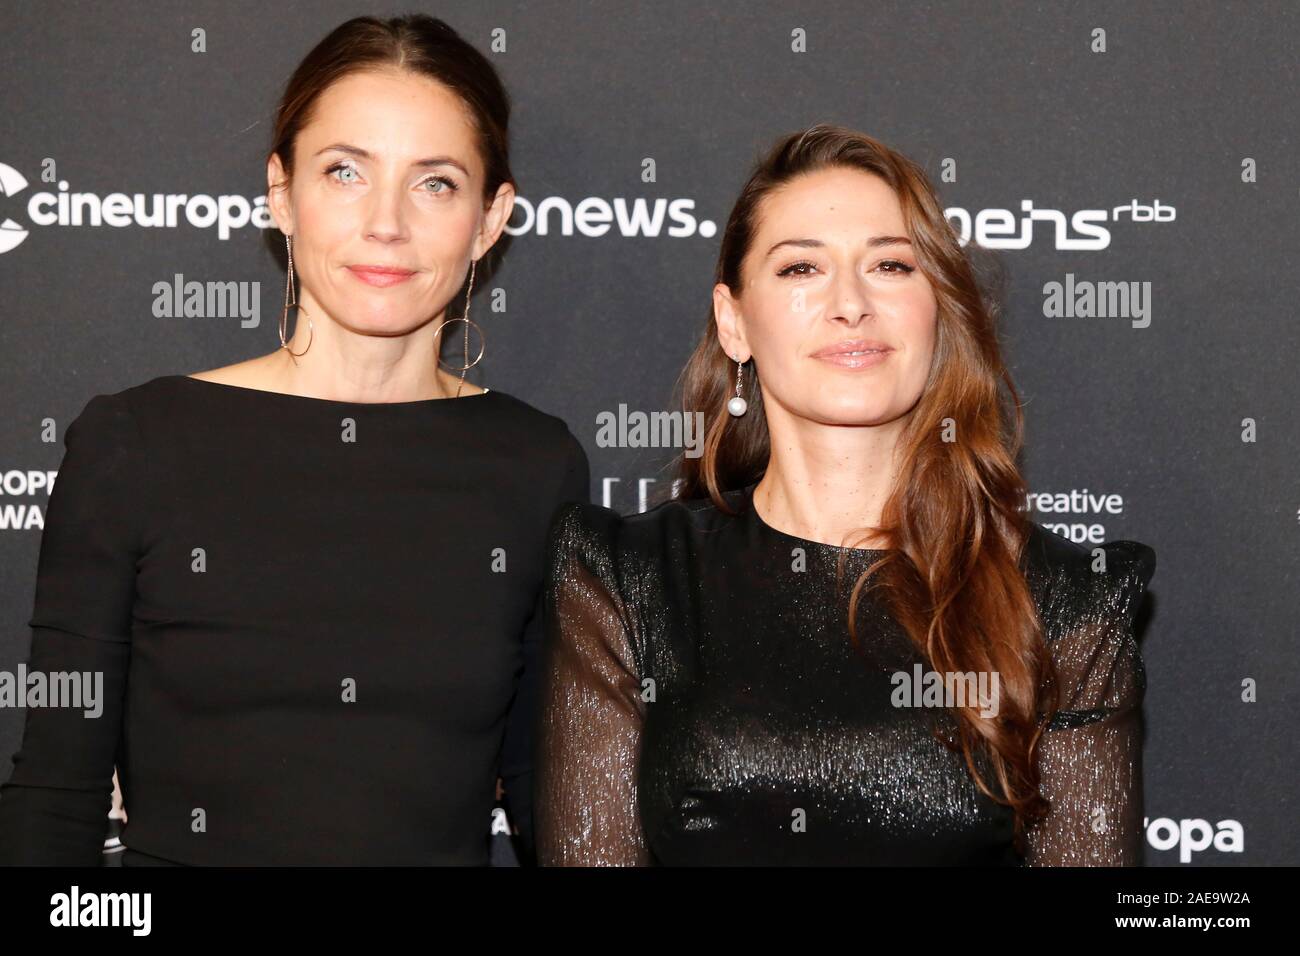 Berlin, Germany. December 7th, 2019. 32nd European Film Awards Ceremony at Haus der Berliner Festspiele in Berlin, Germany. Pictured: film director Tuva Novotny and actress Pia Tjelta  © Piotr Zajac/Alamy Live News Stock Photo